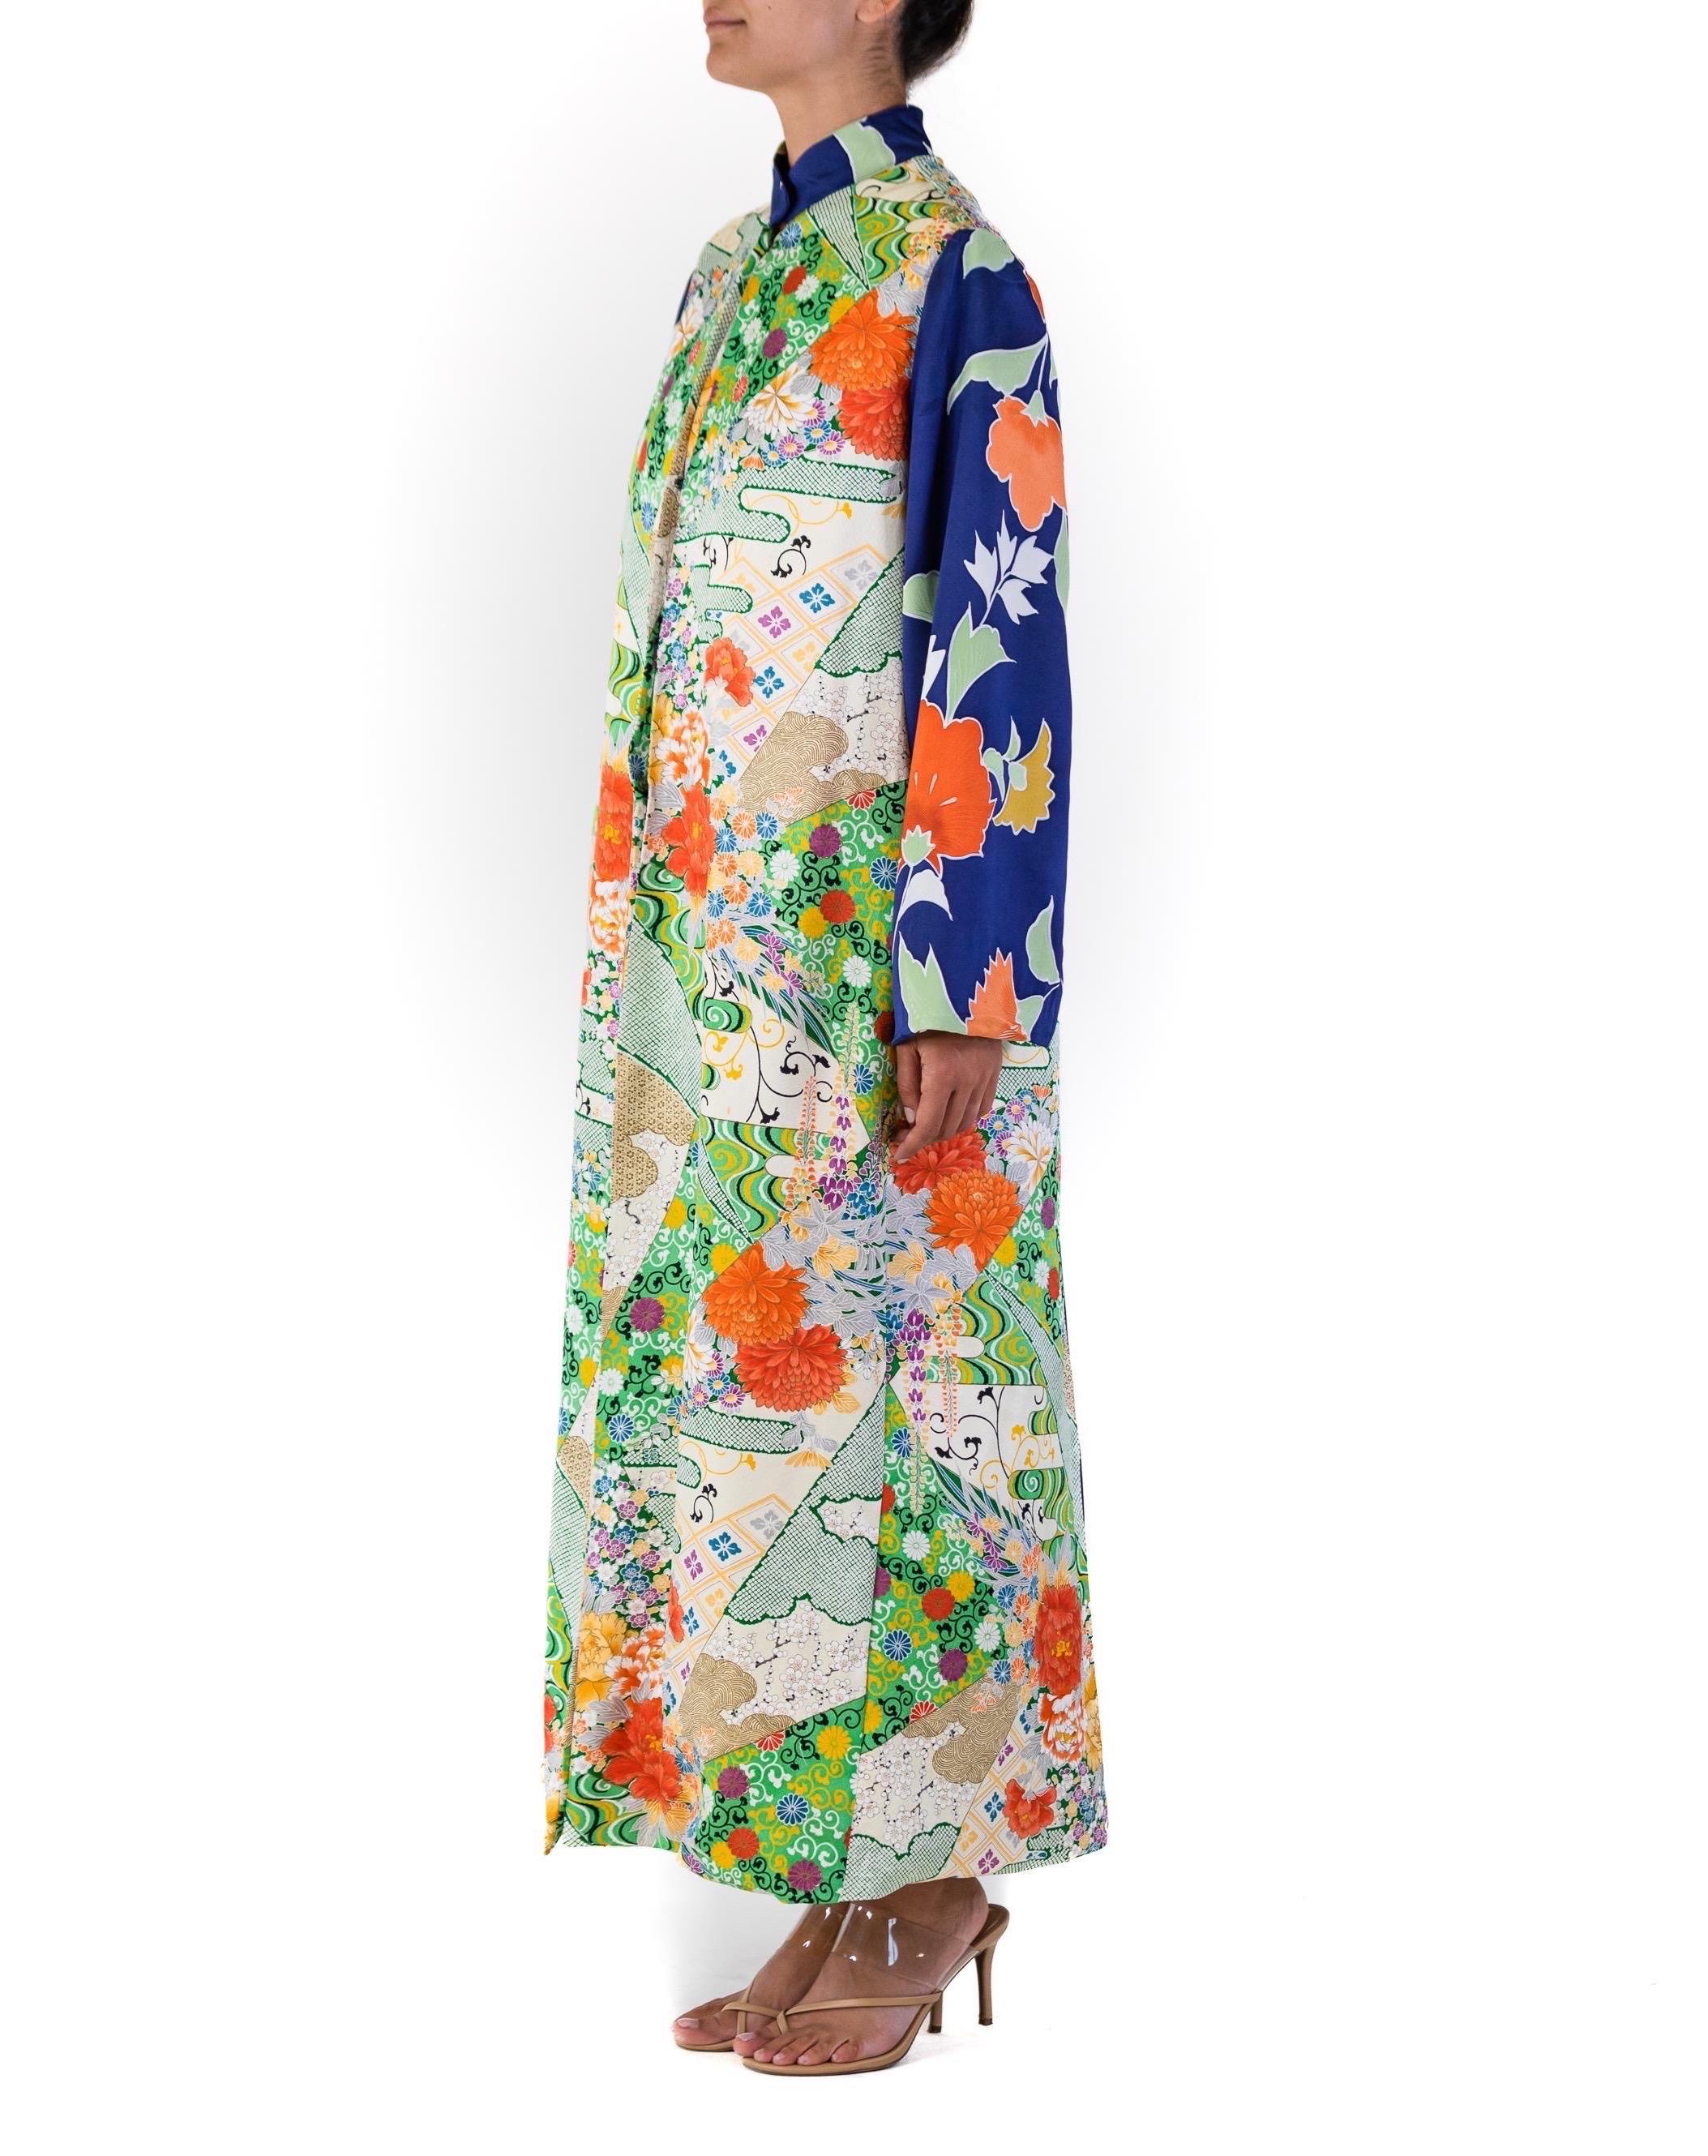 MORPHEW COLLECTION Japanese Kimono Silk Long Duster Geometric Floral Patch Work In Excellent Condition For Sale In New York, NY